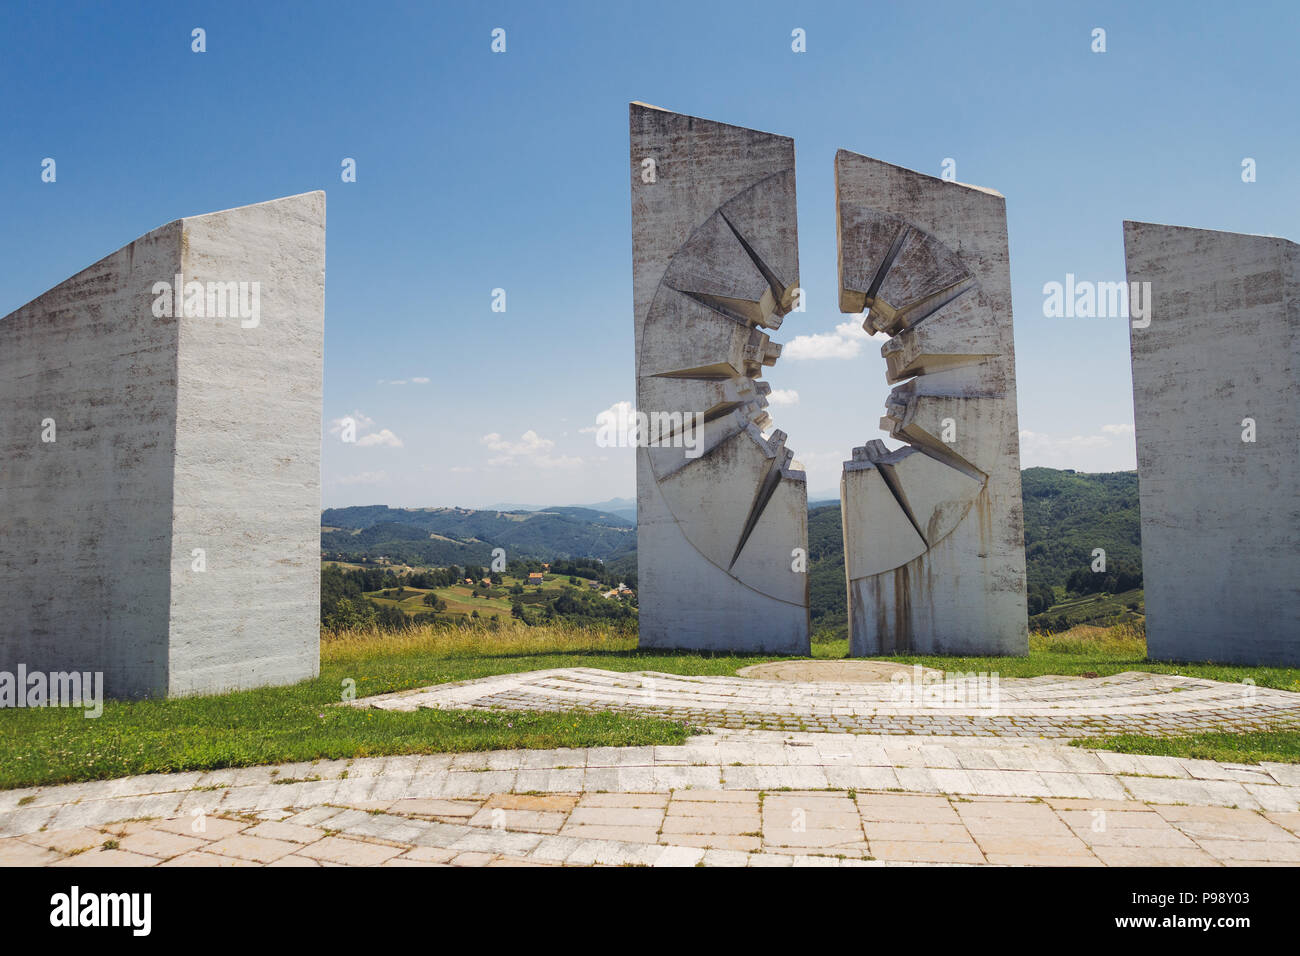 the sweeping white concrete slabs commemorating fallen Partisan fighters at the Kadinjača Memorial Complex, Serbia Stock Photo